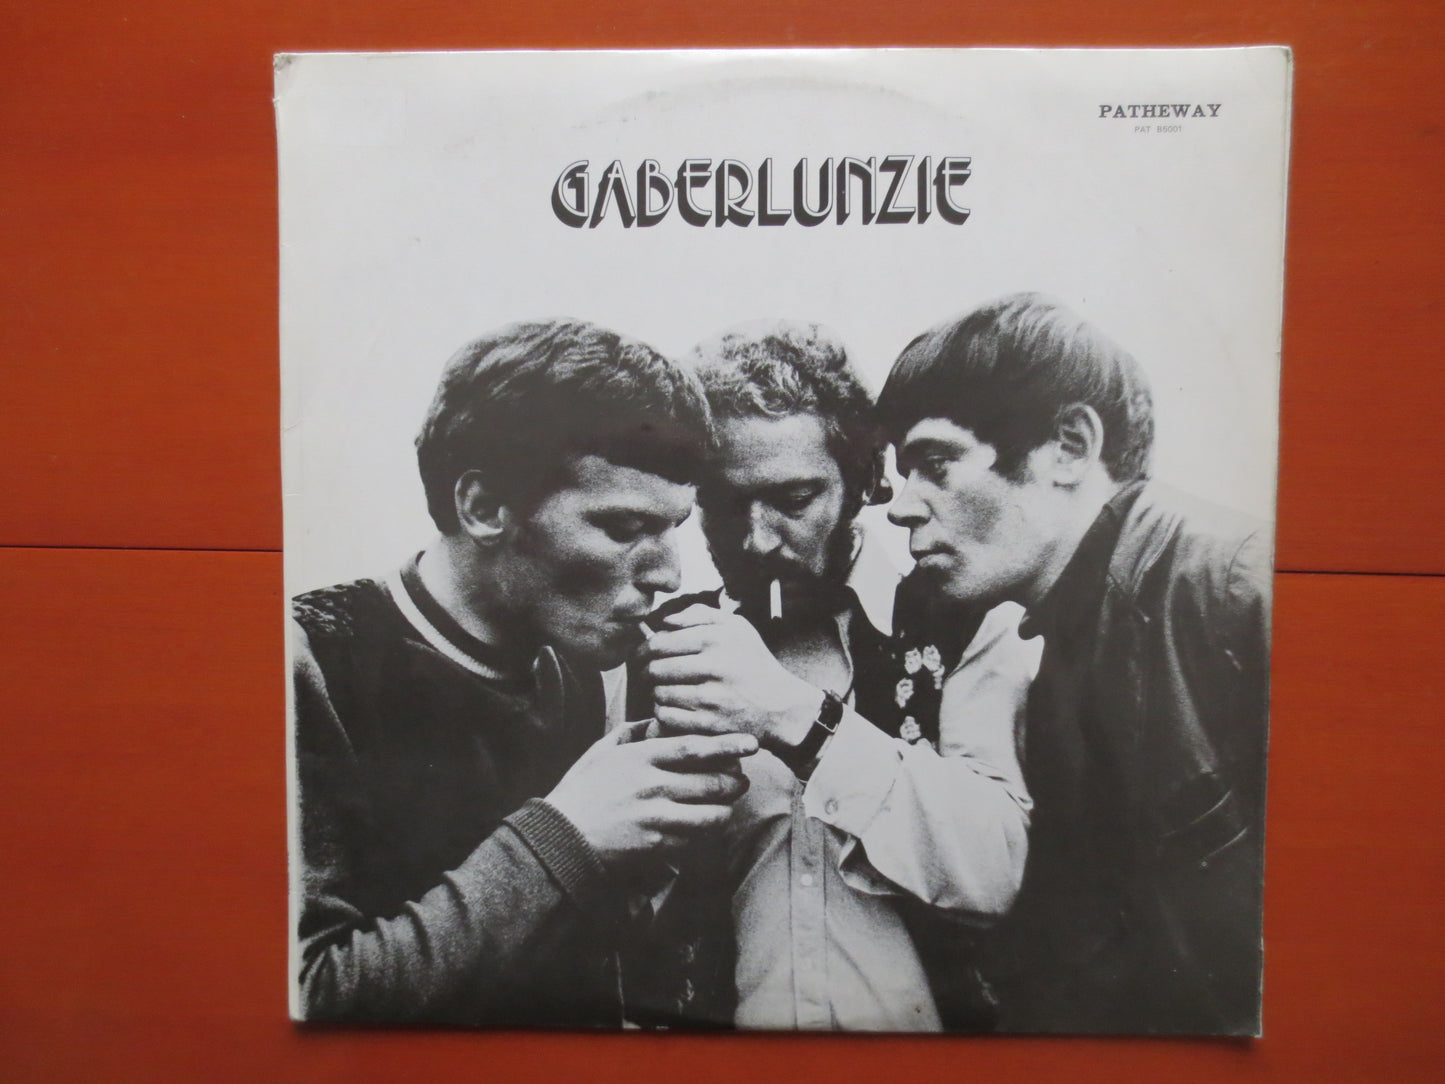 GABERLUNZIE, GABERLUNZIE Record, GABERLUNZIE Album, GABERLUNZIE Lp, Gaberlunzie Vinyl, Scottish Music, Scottish Songs, Lps, 1971 Records